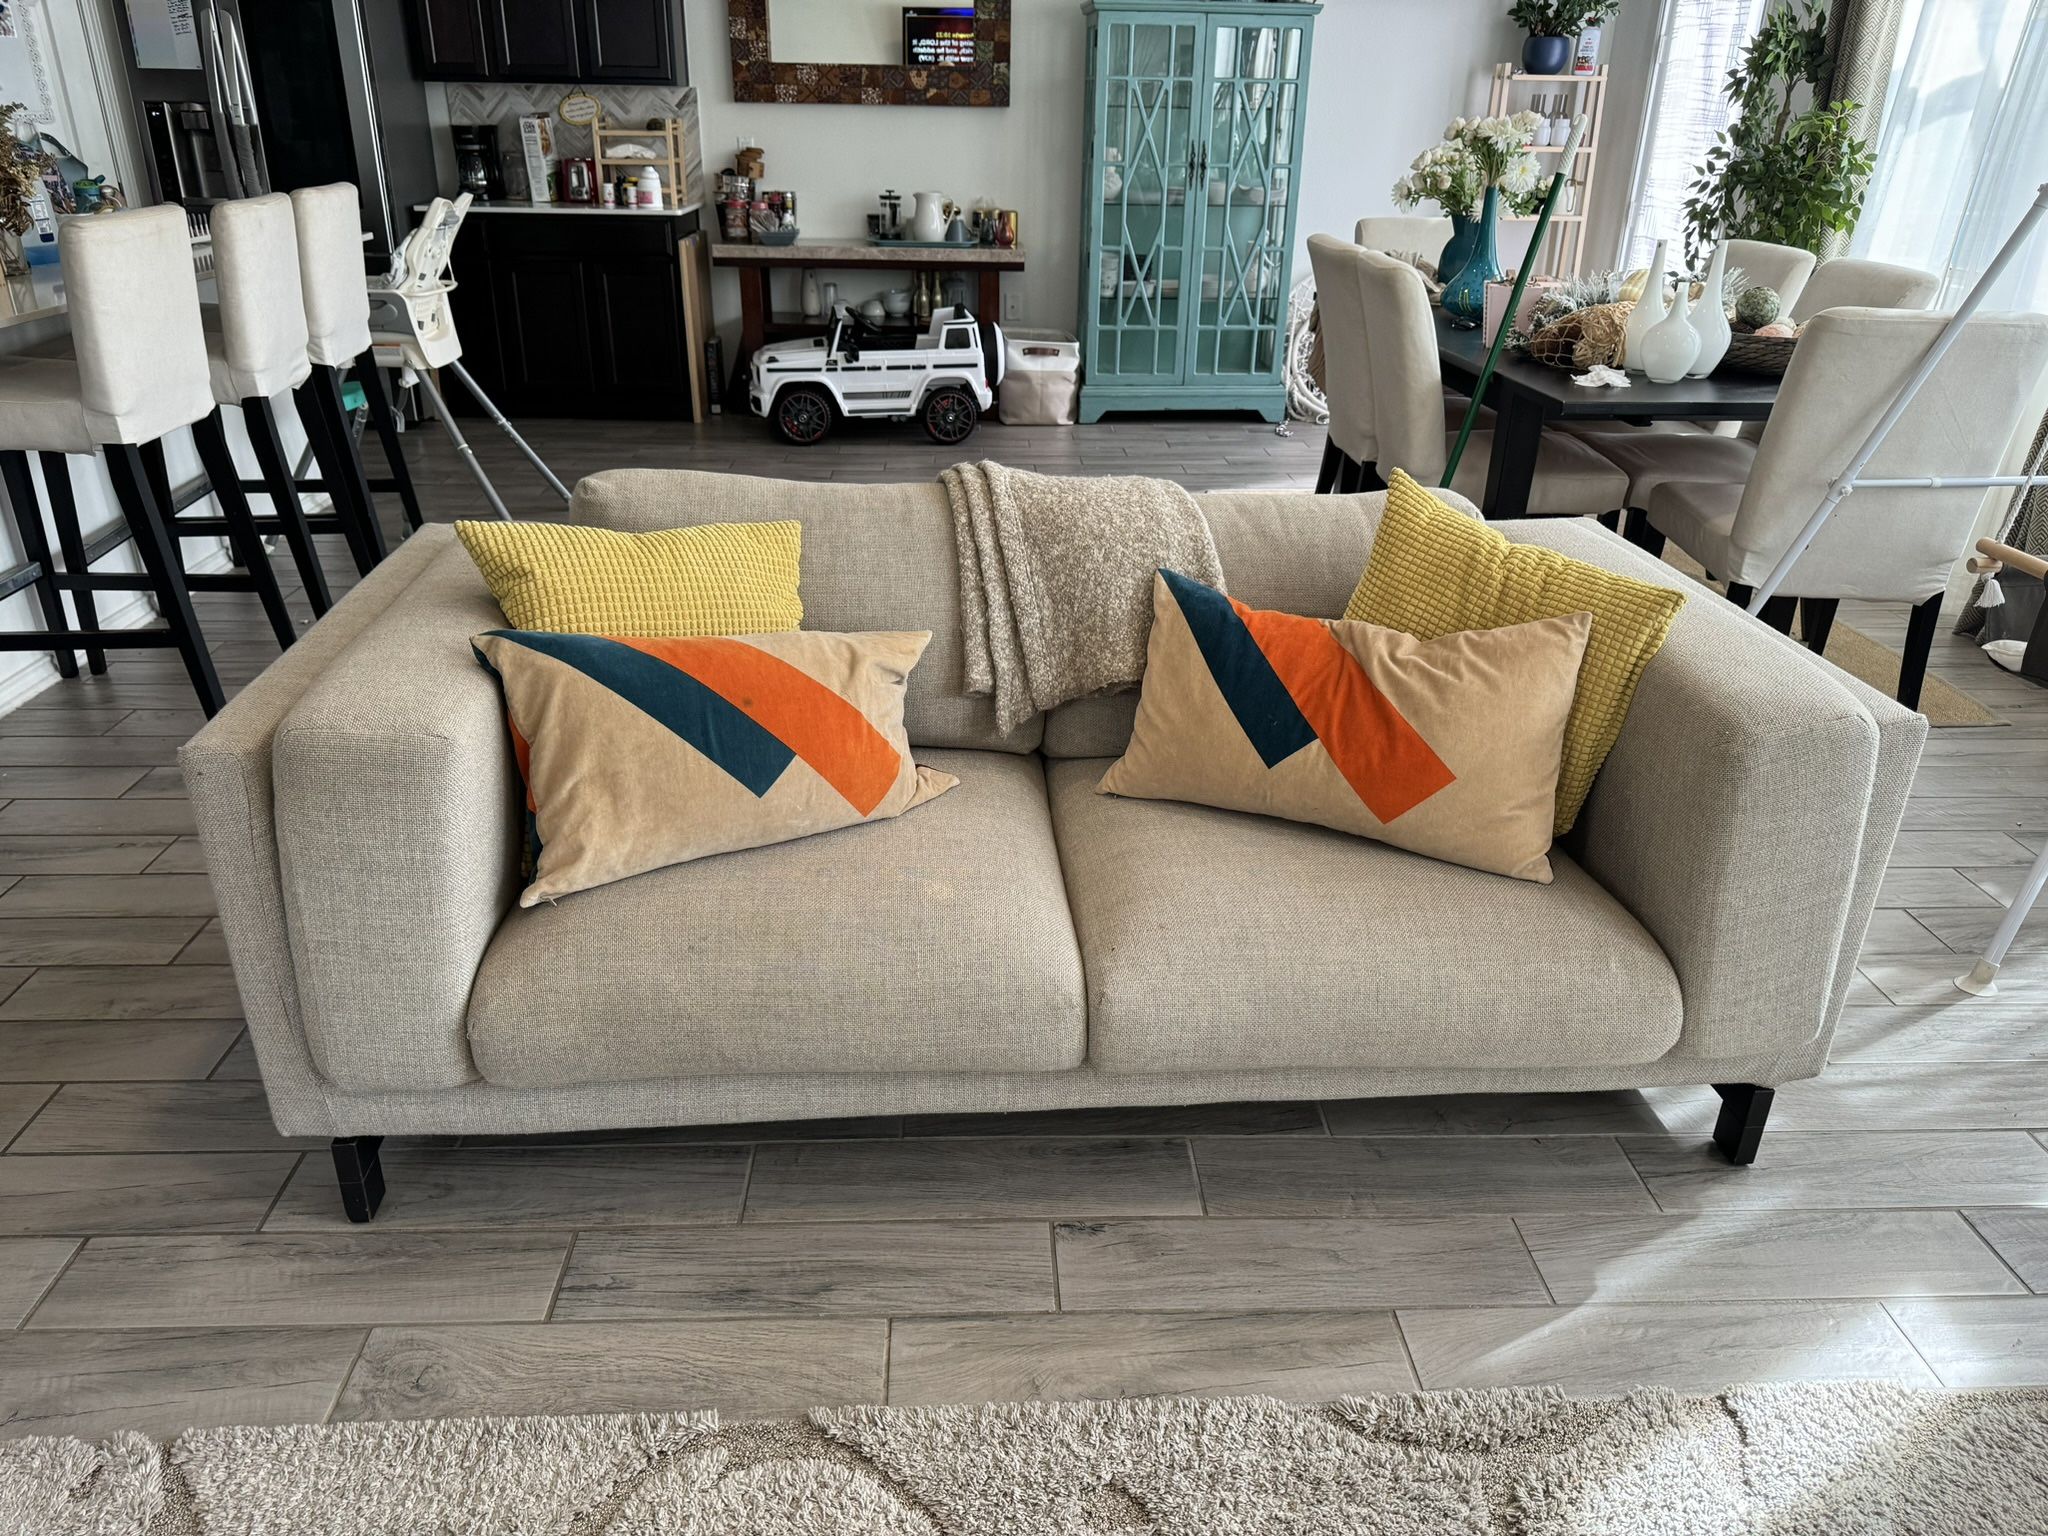 The Most Comfortable Loveseat With Decorative Pillows